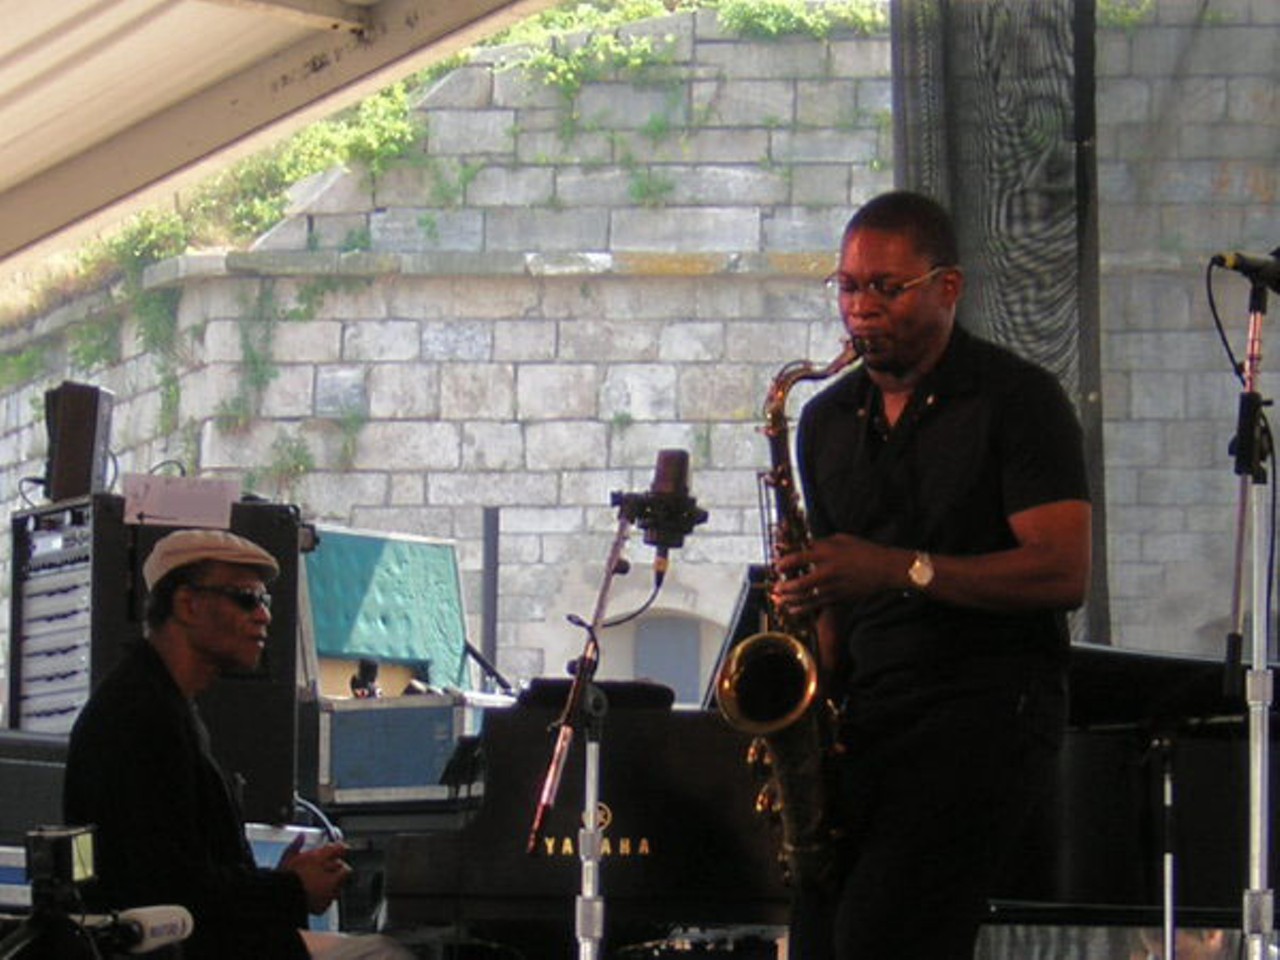 (Detroit Jazz Festival) Ravi Coltrane Quartet
Ravi’s dad, John Coltrane, would be proud of the career his son has built. In a 2007 profile, Ravi told Metro Times he didn’t want to make his mark playing his dad’s music, and has turned down offers to record some of his dad’s work. Ravi has a wonderful discography. In 2012, he made his first album for Blue Note Records, a release titled Spirit Fiction. He’ll have to explain the title, but the compositions on it are mind-blowing good, representing his defining moment as a leader.  Click here for more info